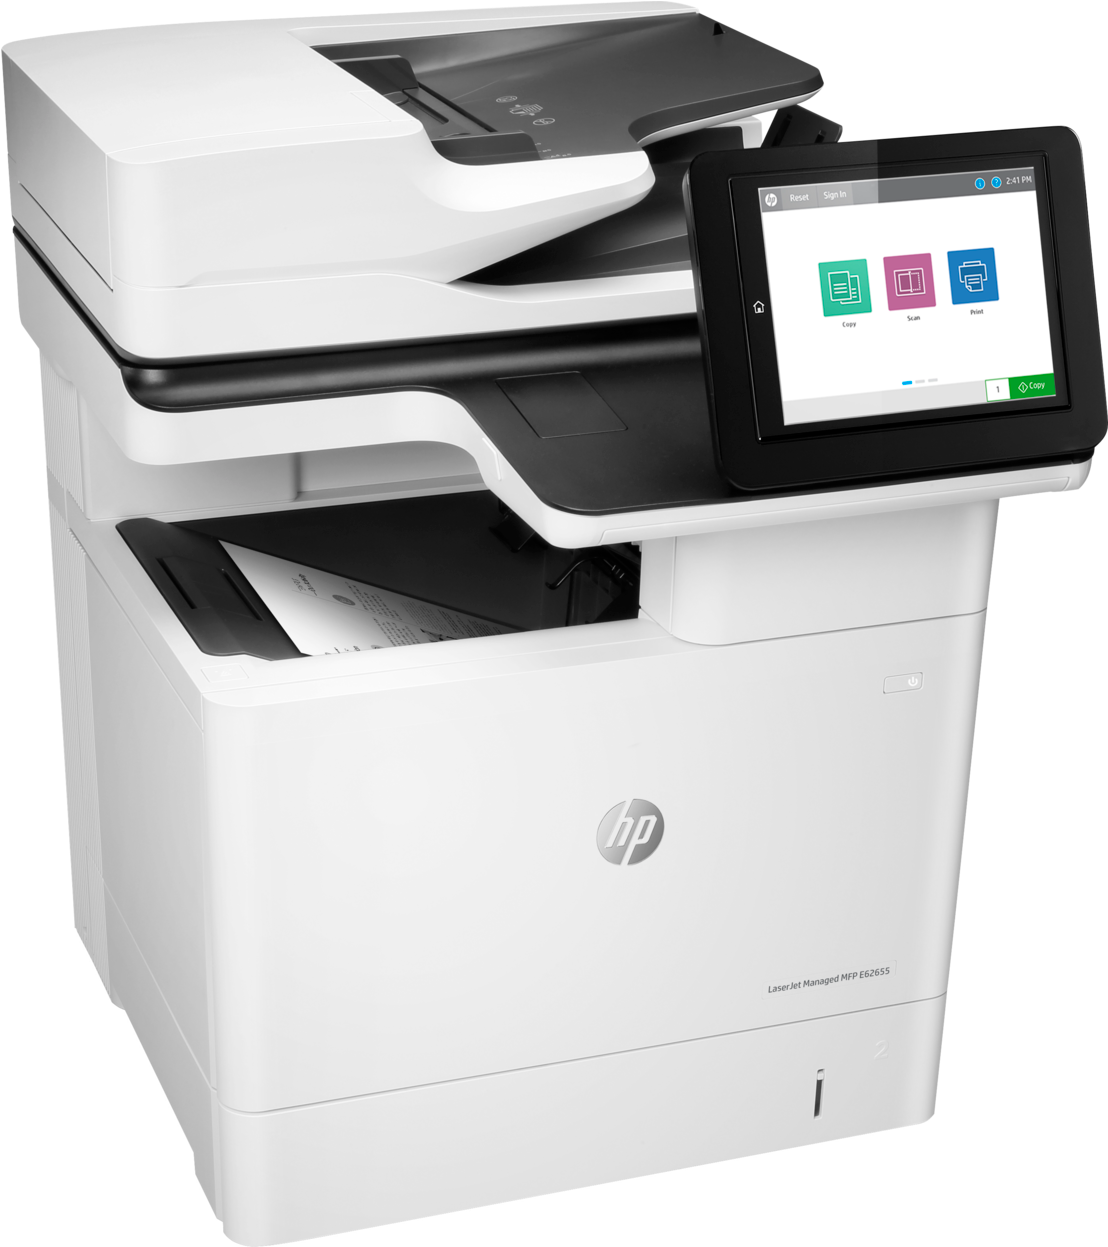 A White Printer With A Tablet On Top